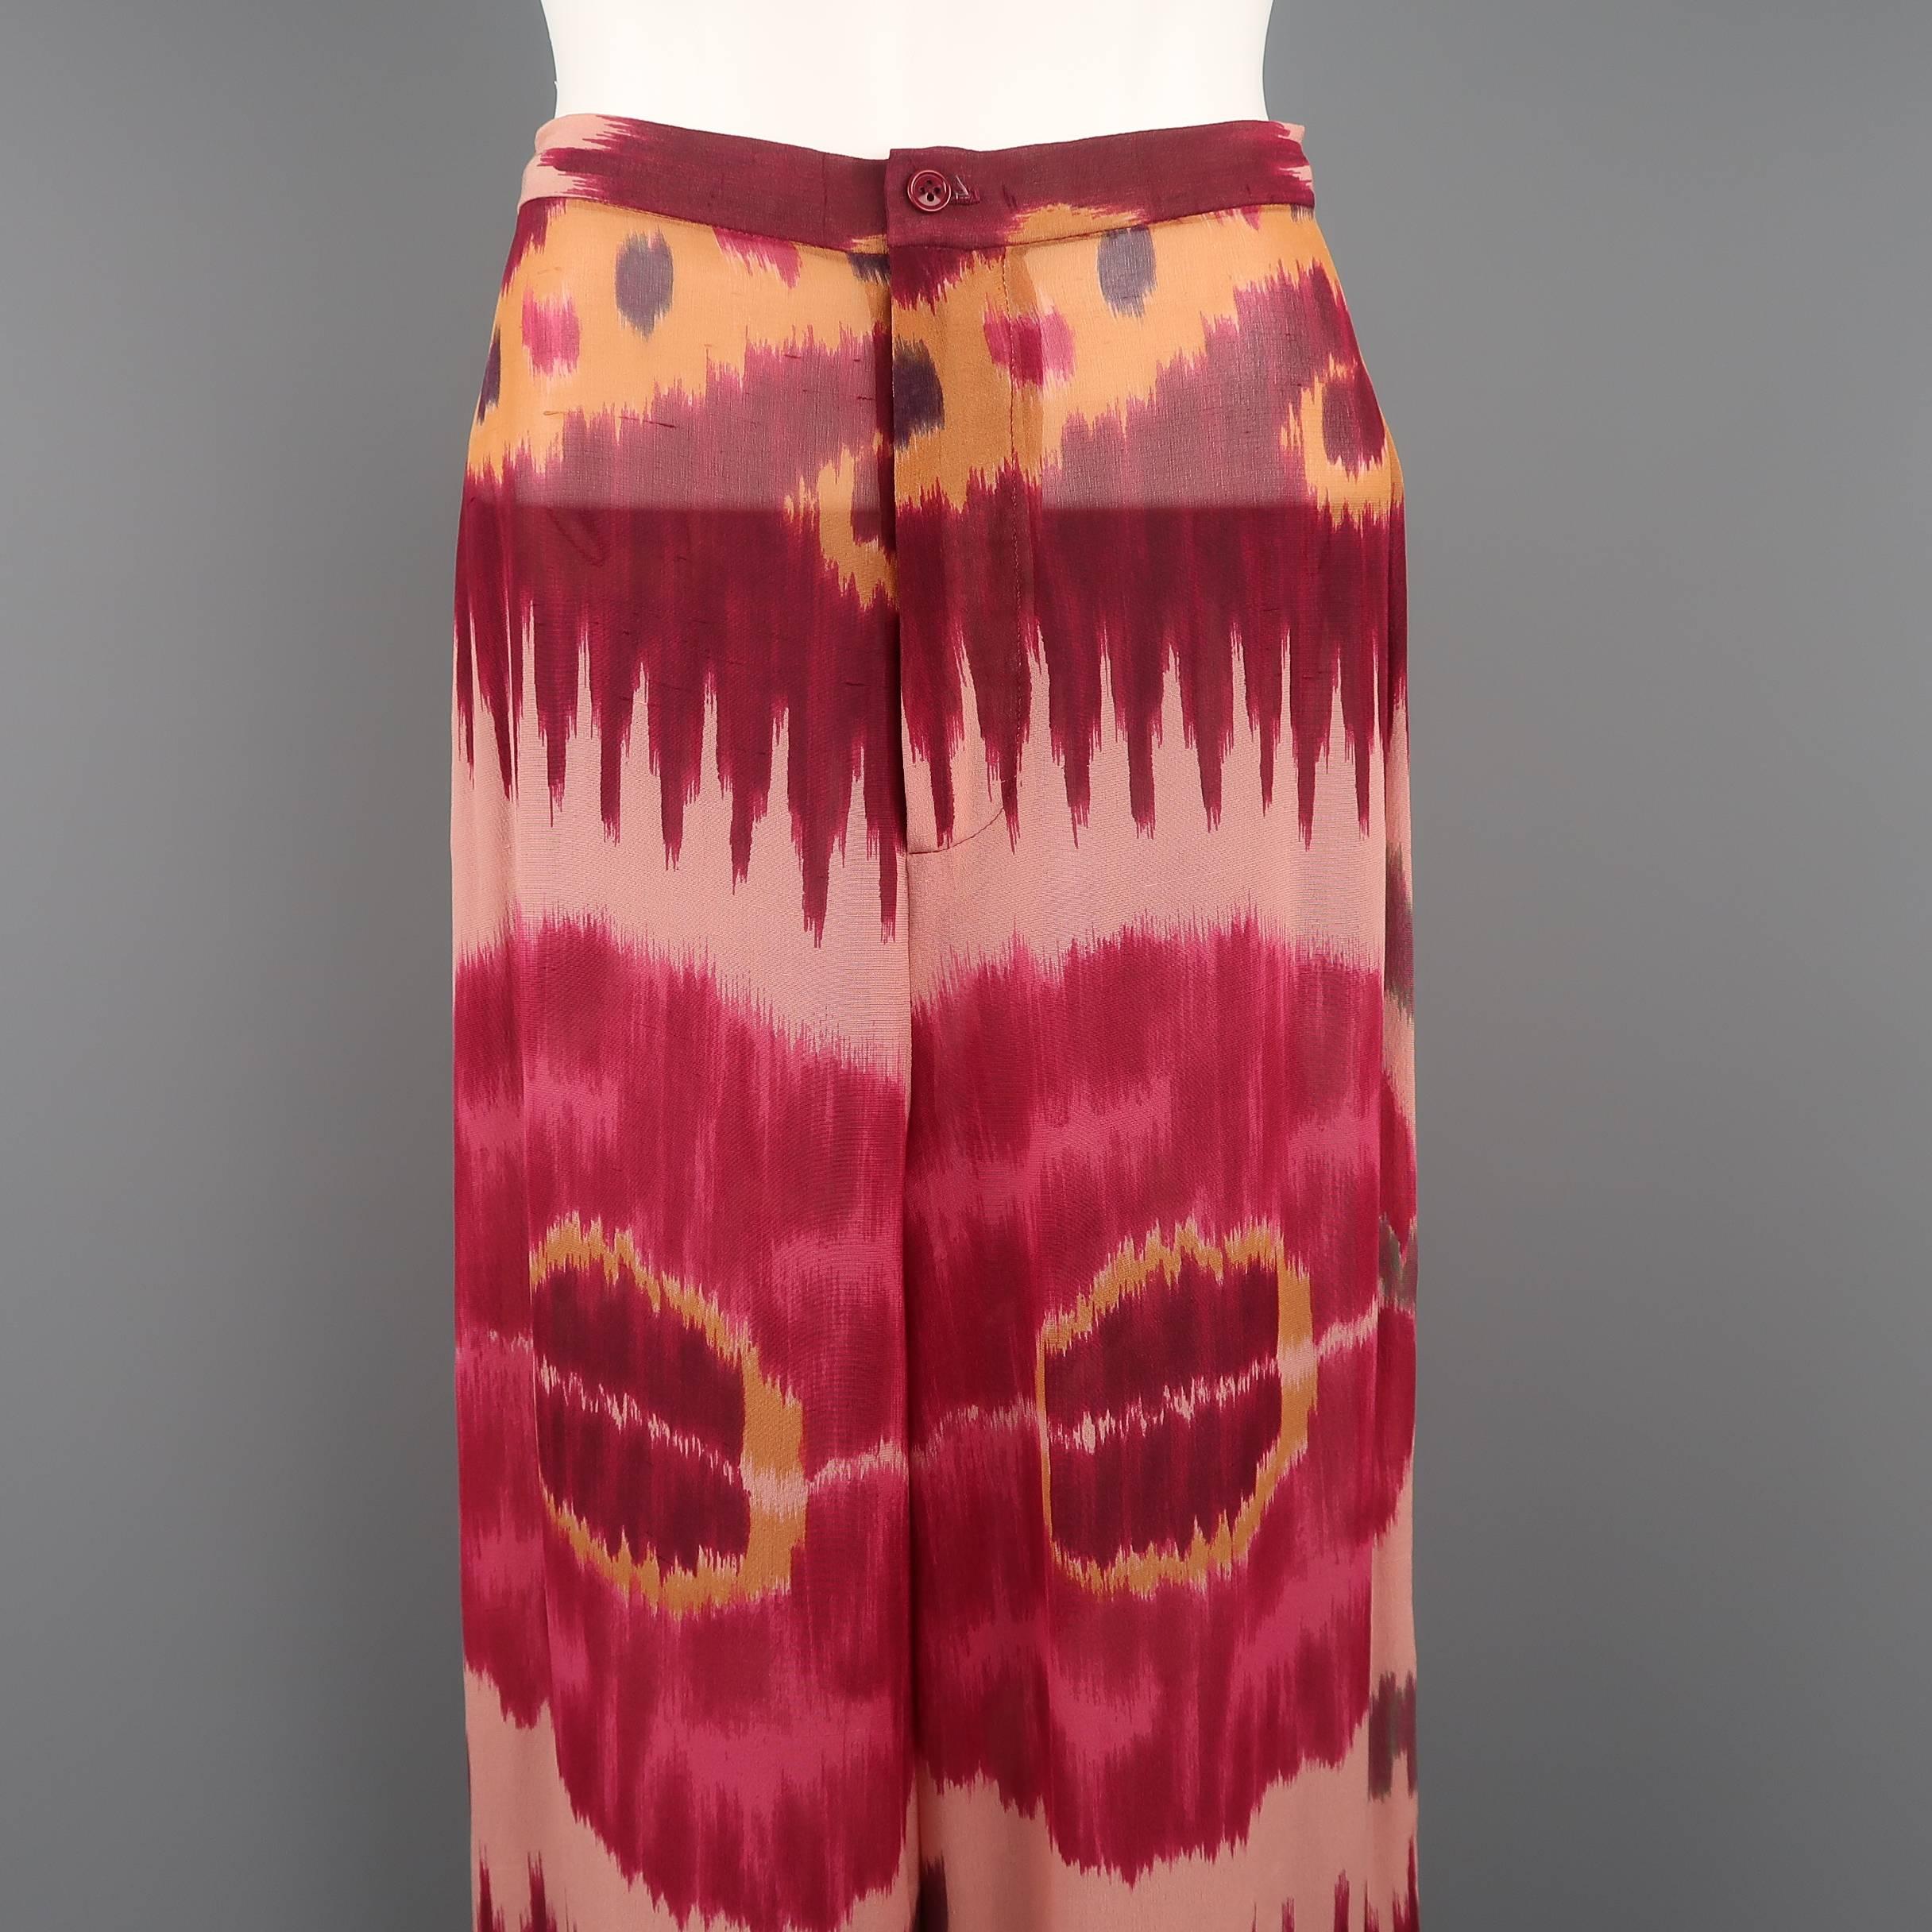 RALPH LAUREN COLLECTION trousers come in pink ikat print silk chiffon with hues of burgundy and orange with extreme wide legs.
 
Good Pre-Owned Condition.
Marked: 8
 
Measurements:
 
Waist: 28 in.
Rise: 13 in.
Inseam: 29 in.
Leg Opening: 27 in.
